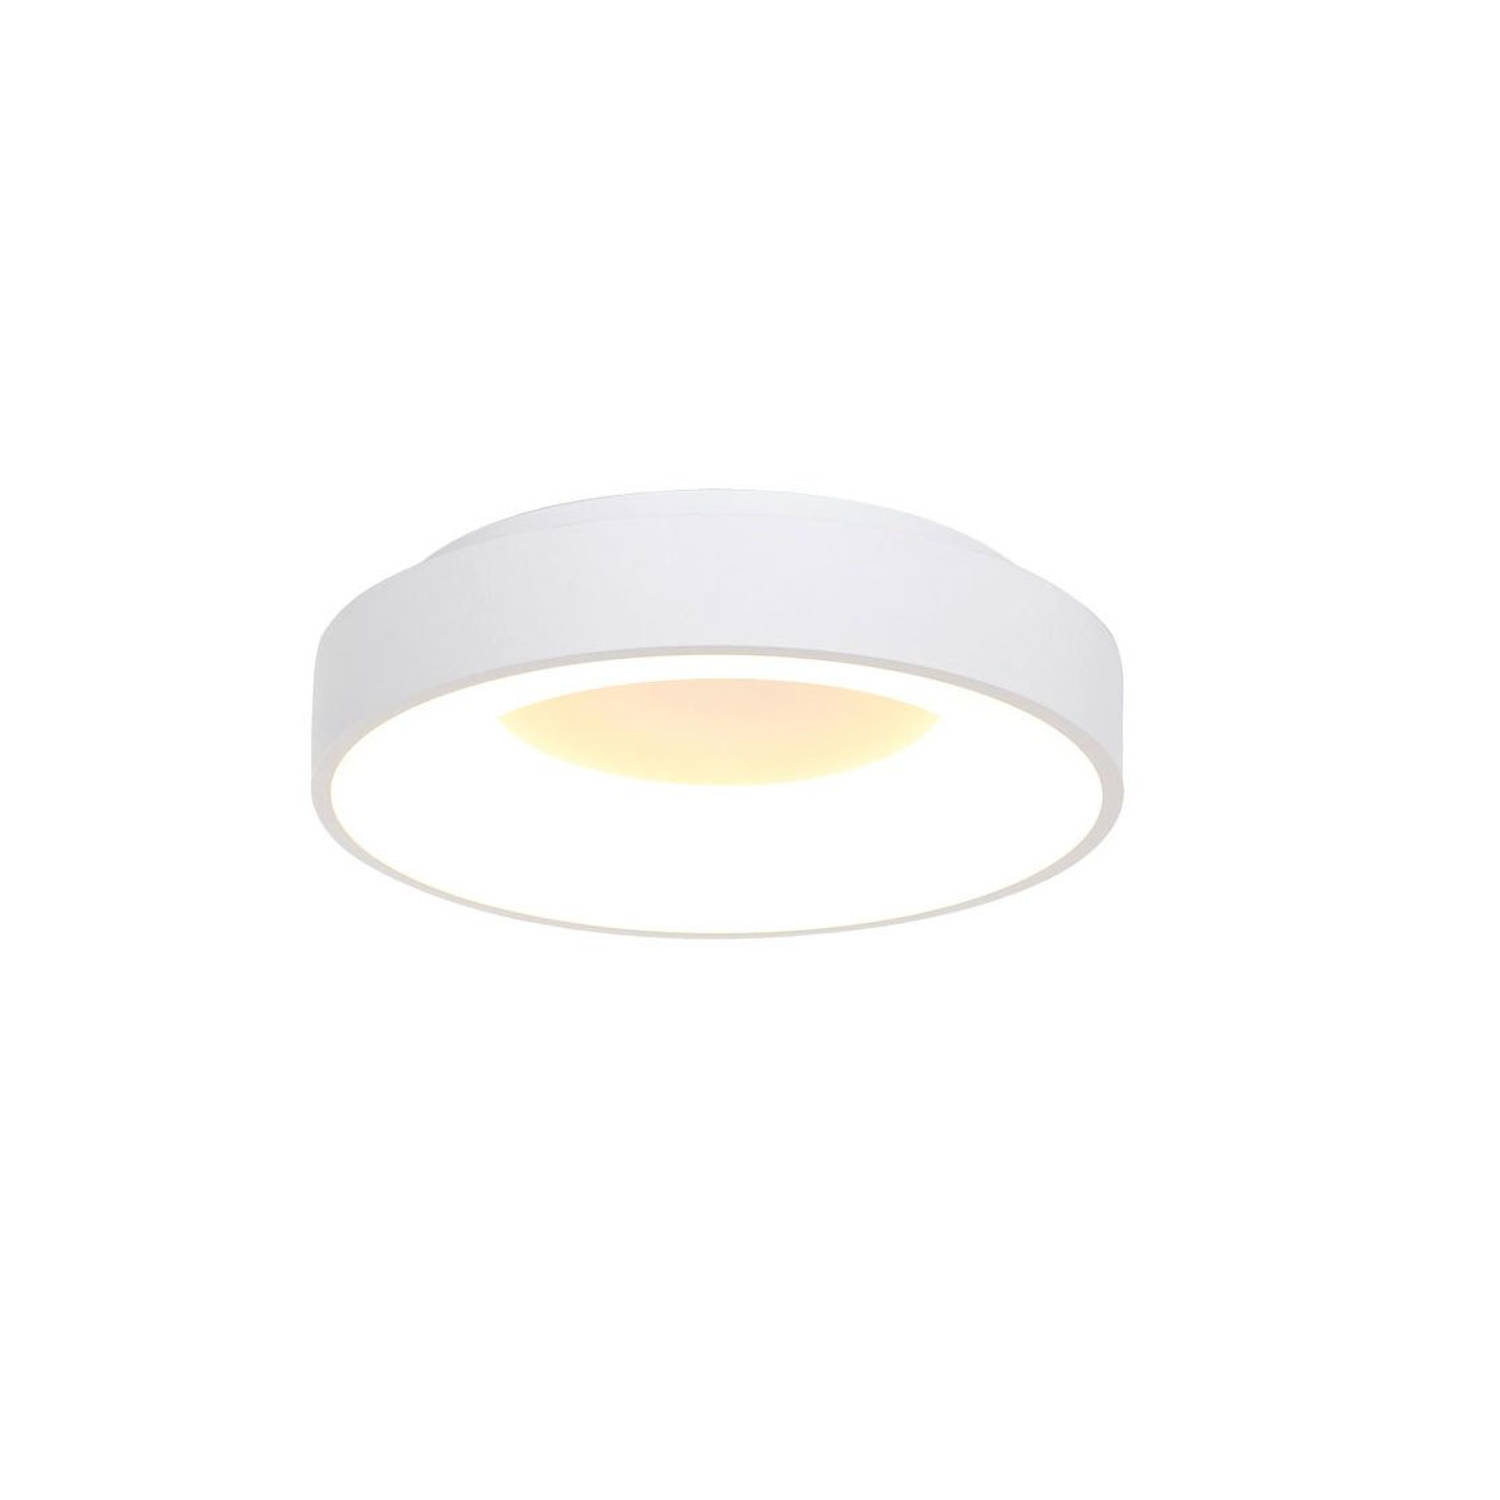 Steinhauer Plafondlamp ceiling and wall LED 3086w wit